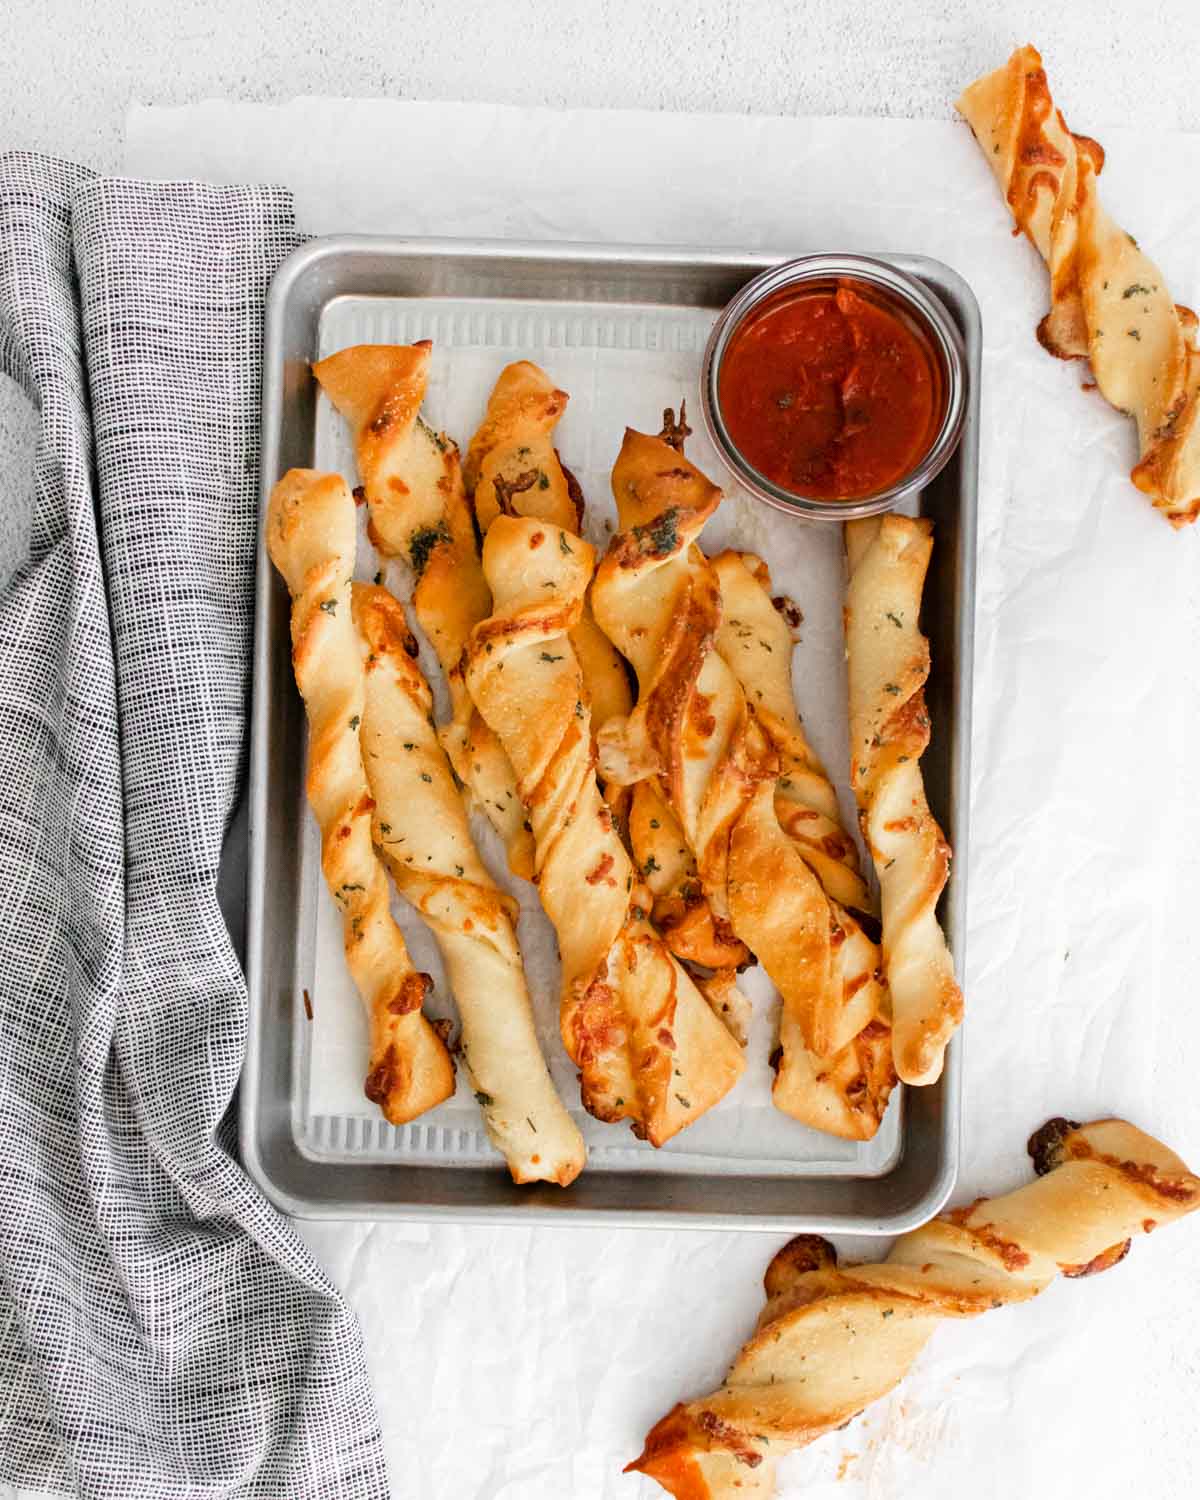 Baking sheet full of pizza twists and pizza sauce